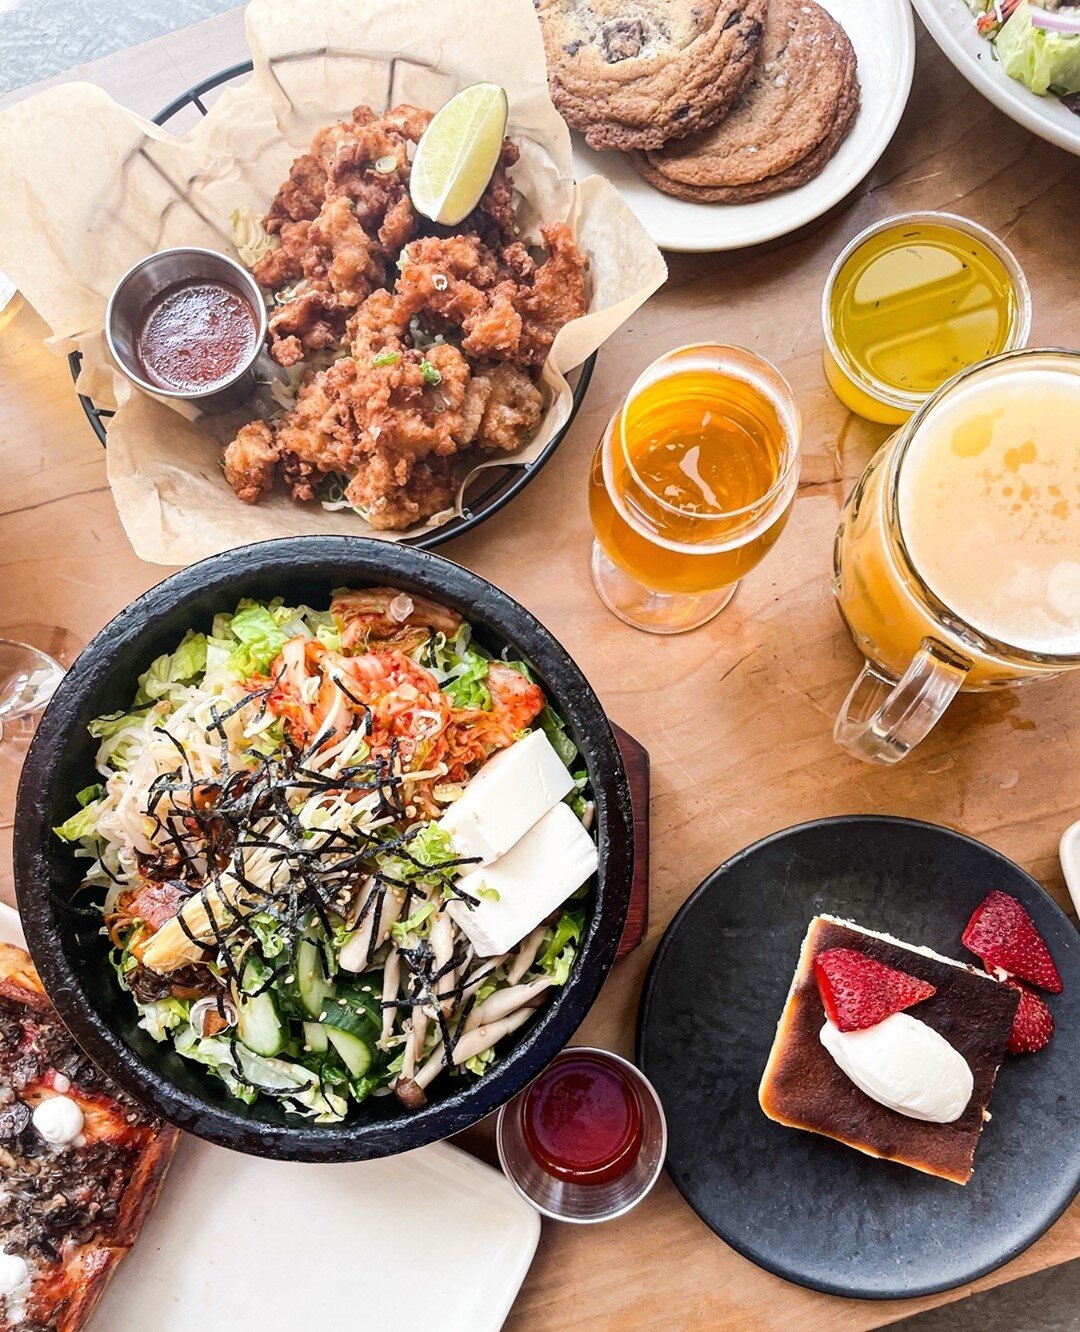 Sunday funday with brews and bites here at Mid-Market! Come on by! 🤩⁠
⁠
📷 Use our hashtag #getitstoned or @namustonepot for a chance to be featured!⁠
⁠
#namustonepot #7x7bayarea #abc7eyewitness #sf #sanfrancisco #sfeats #sffoodie #bayarea #bayareae